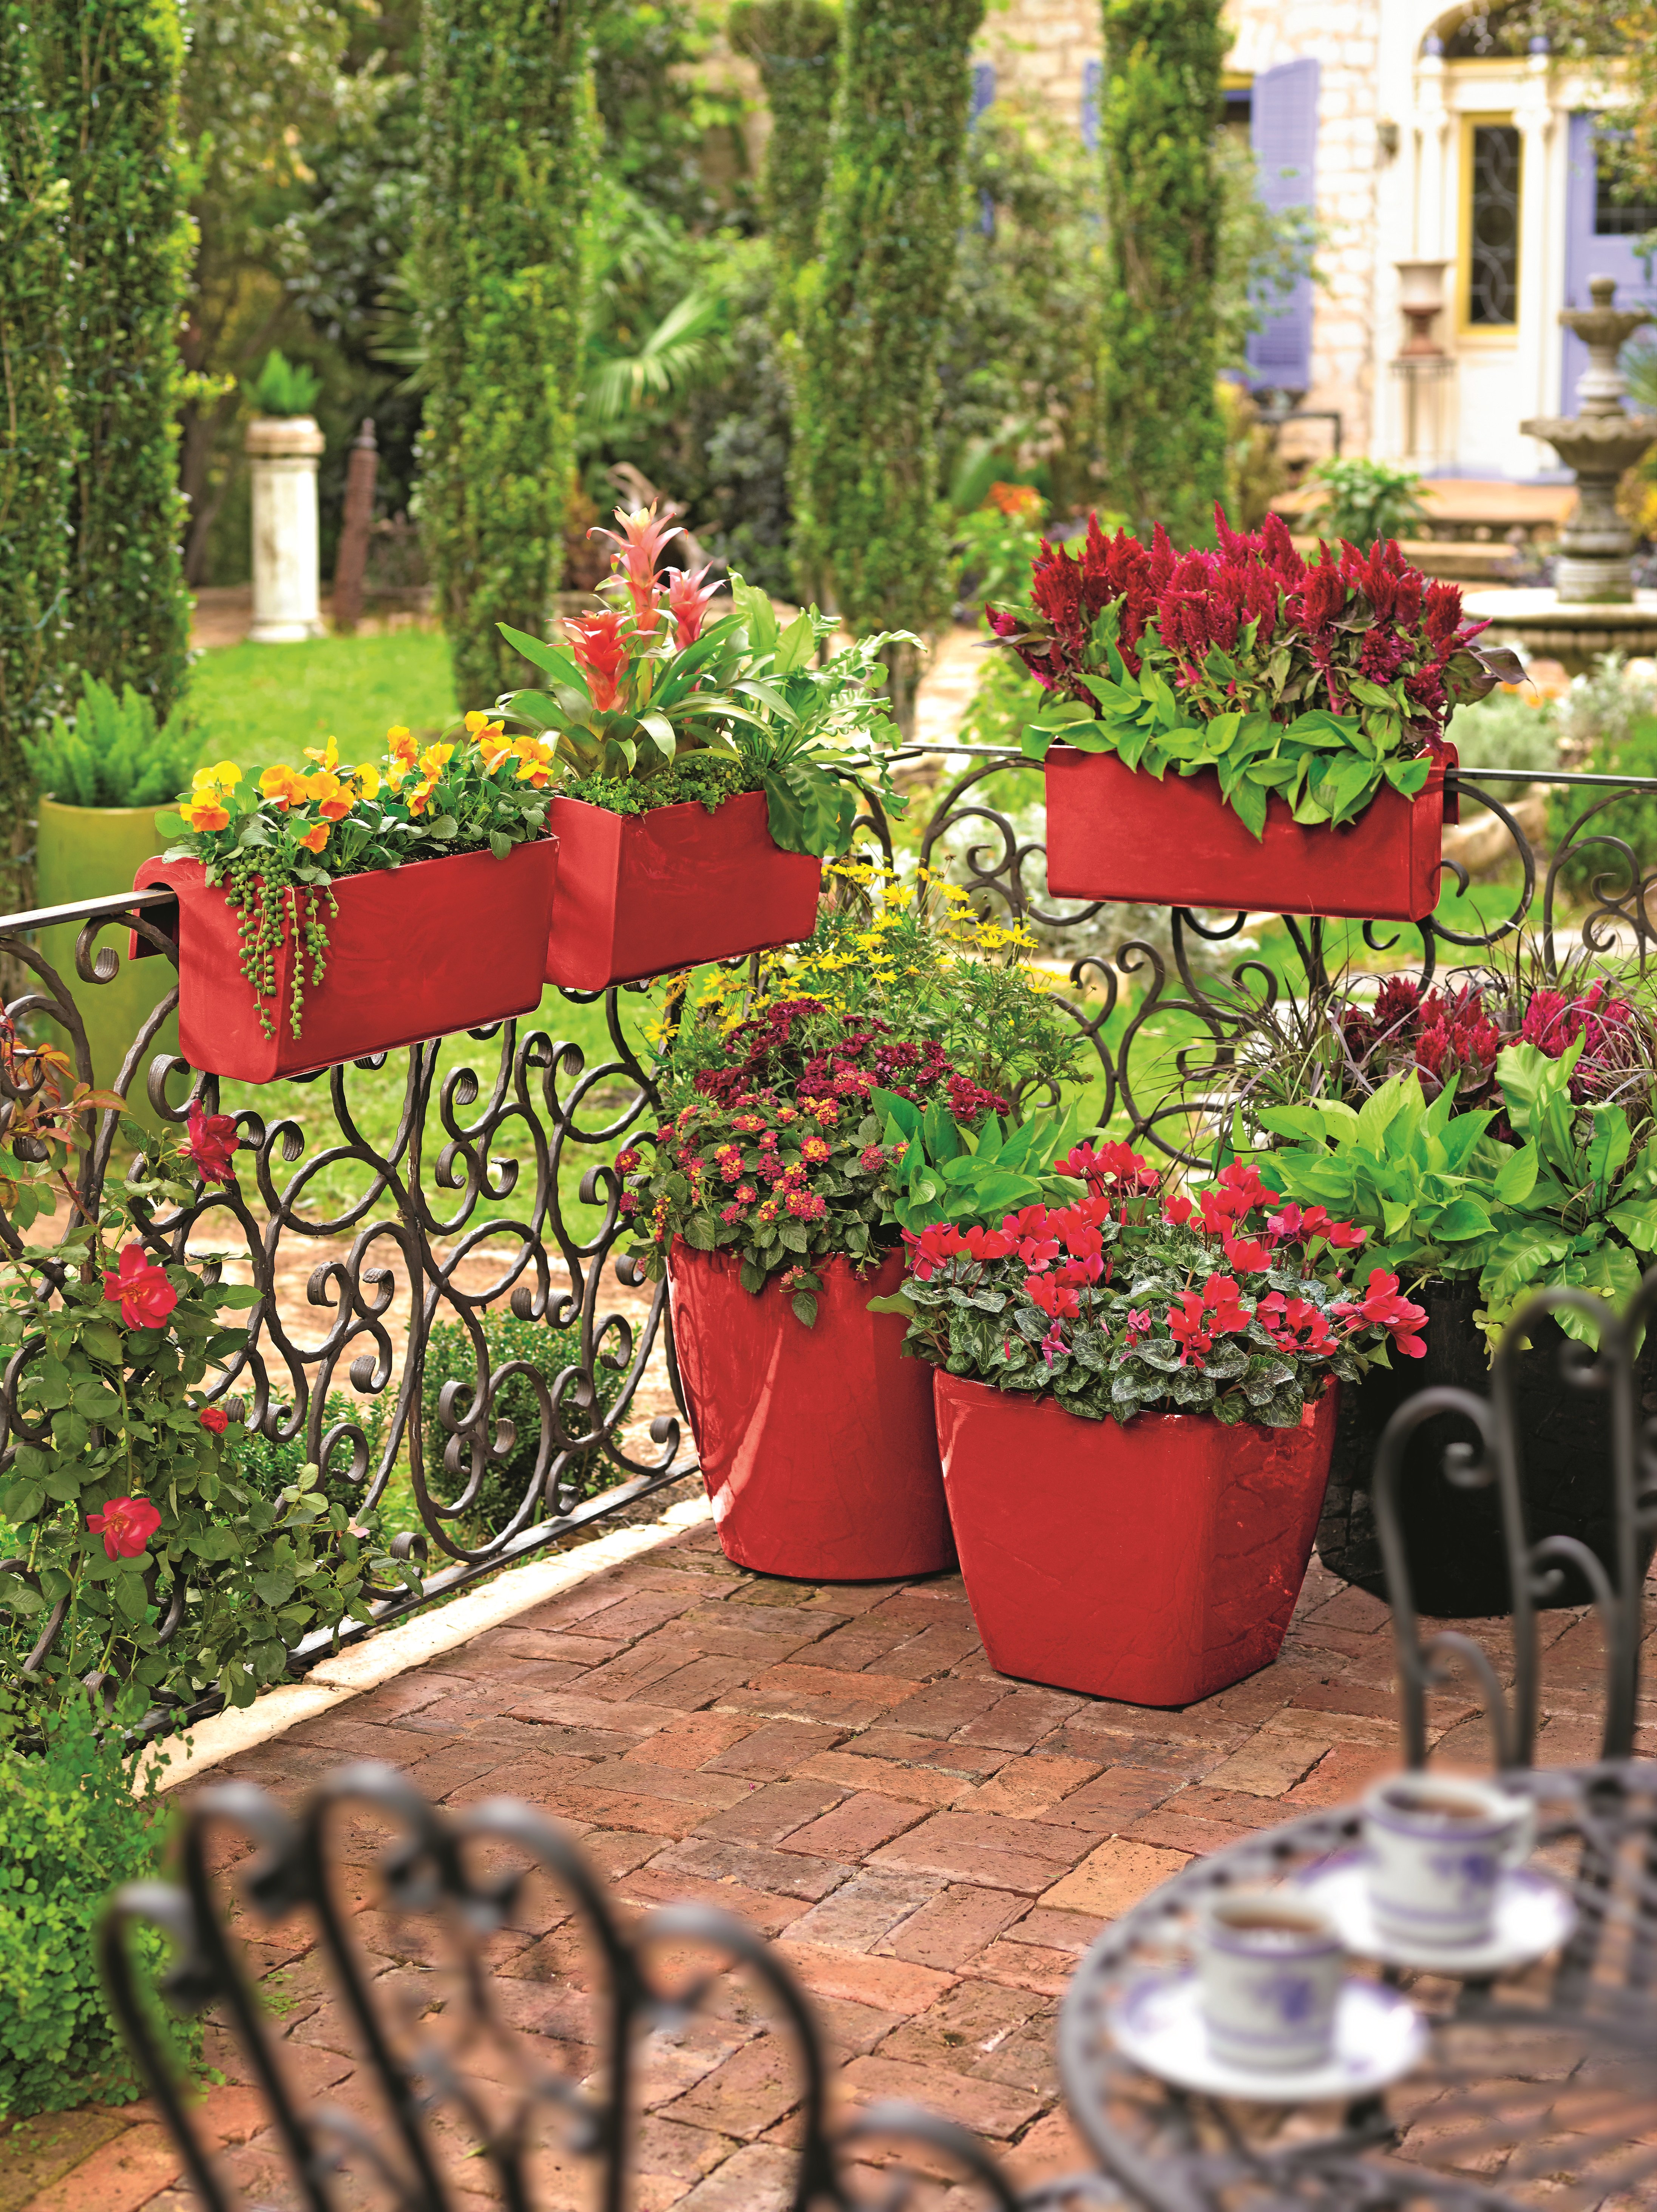 Get growing with 10 tips for foolproof flowerpots